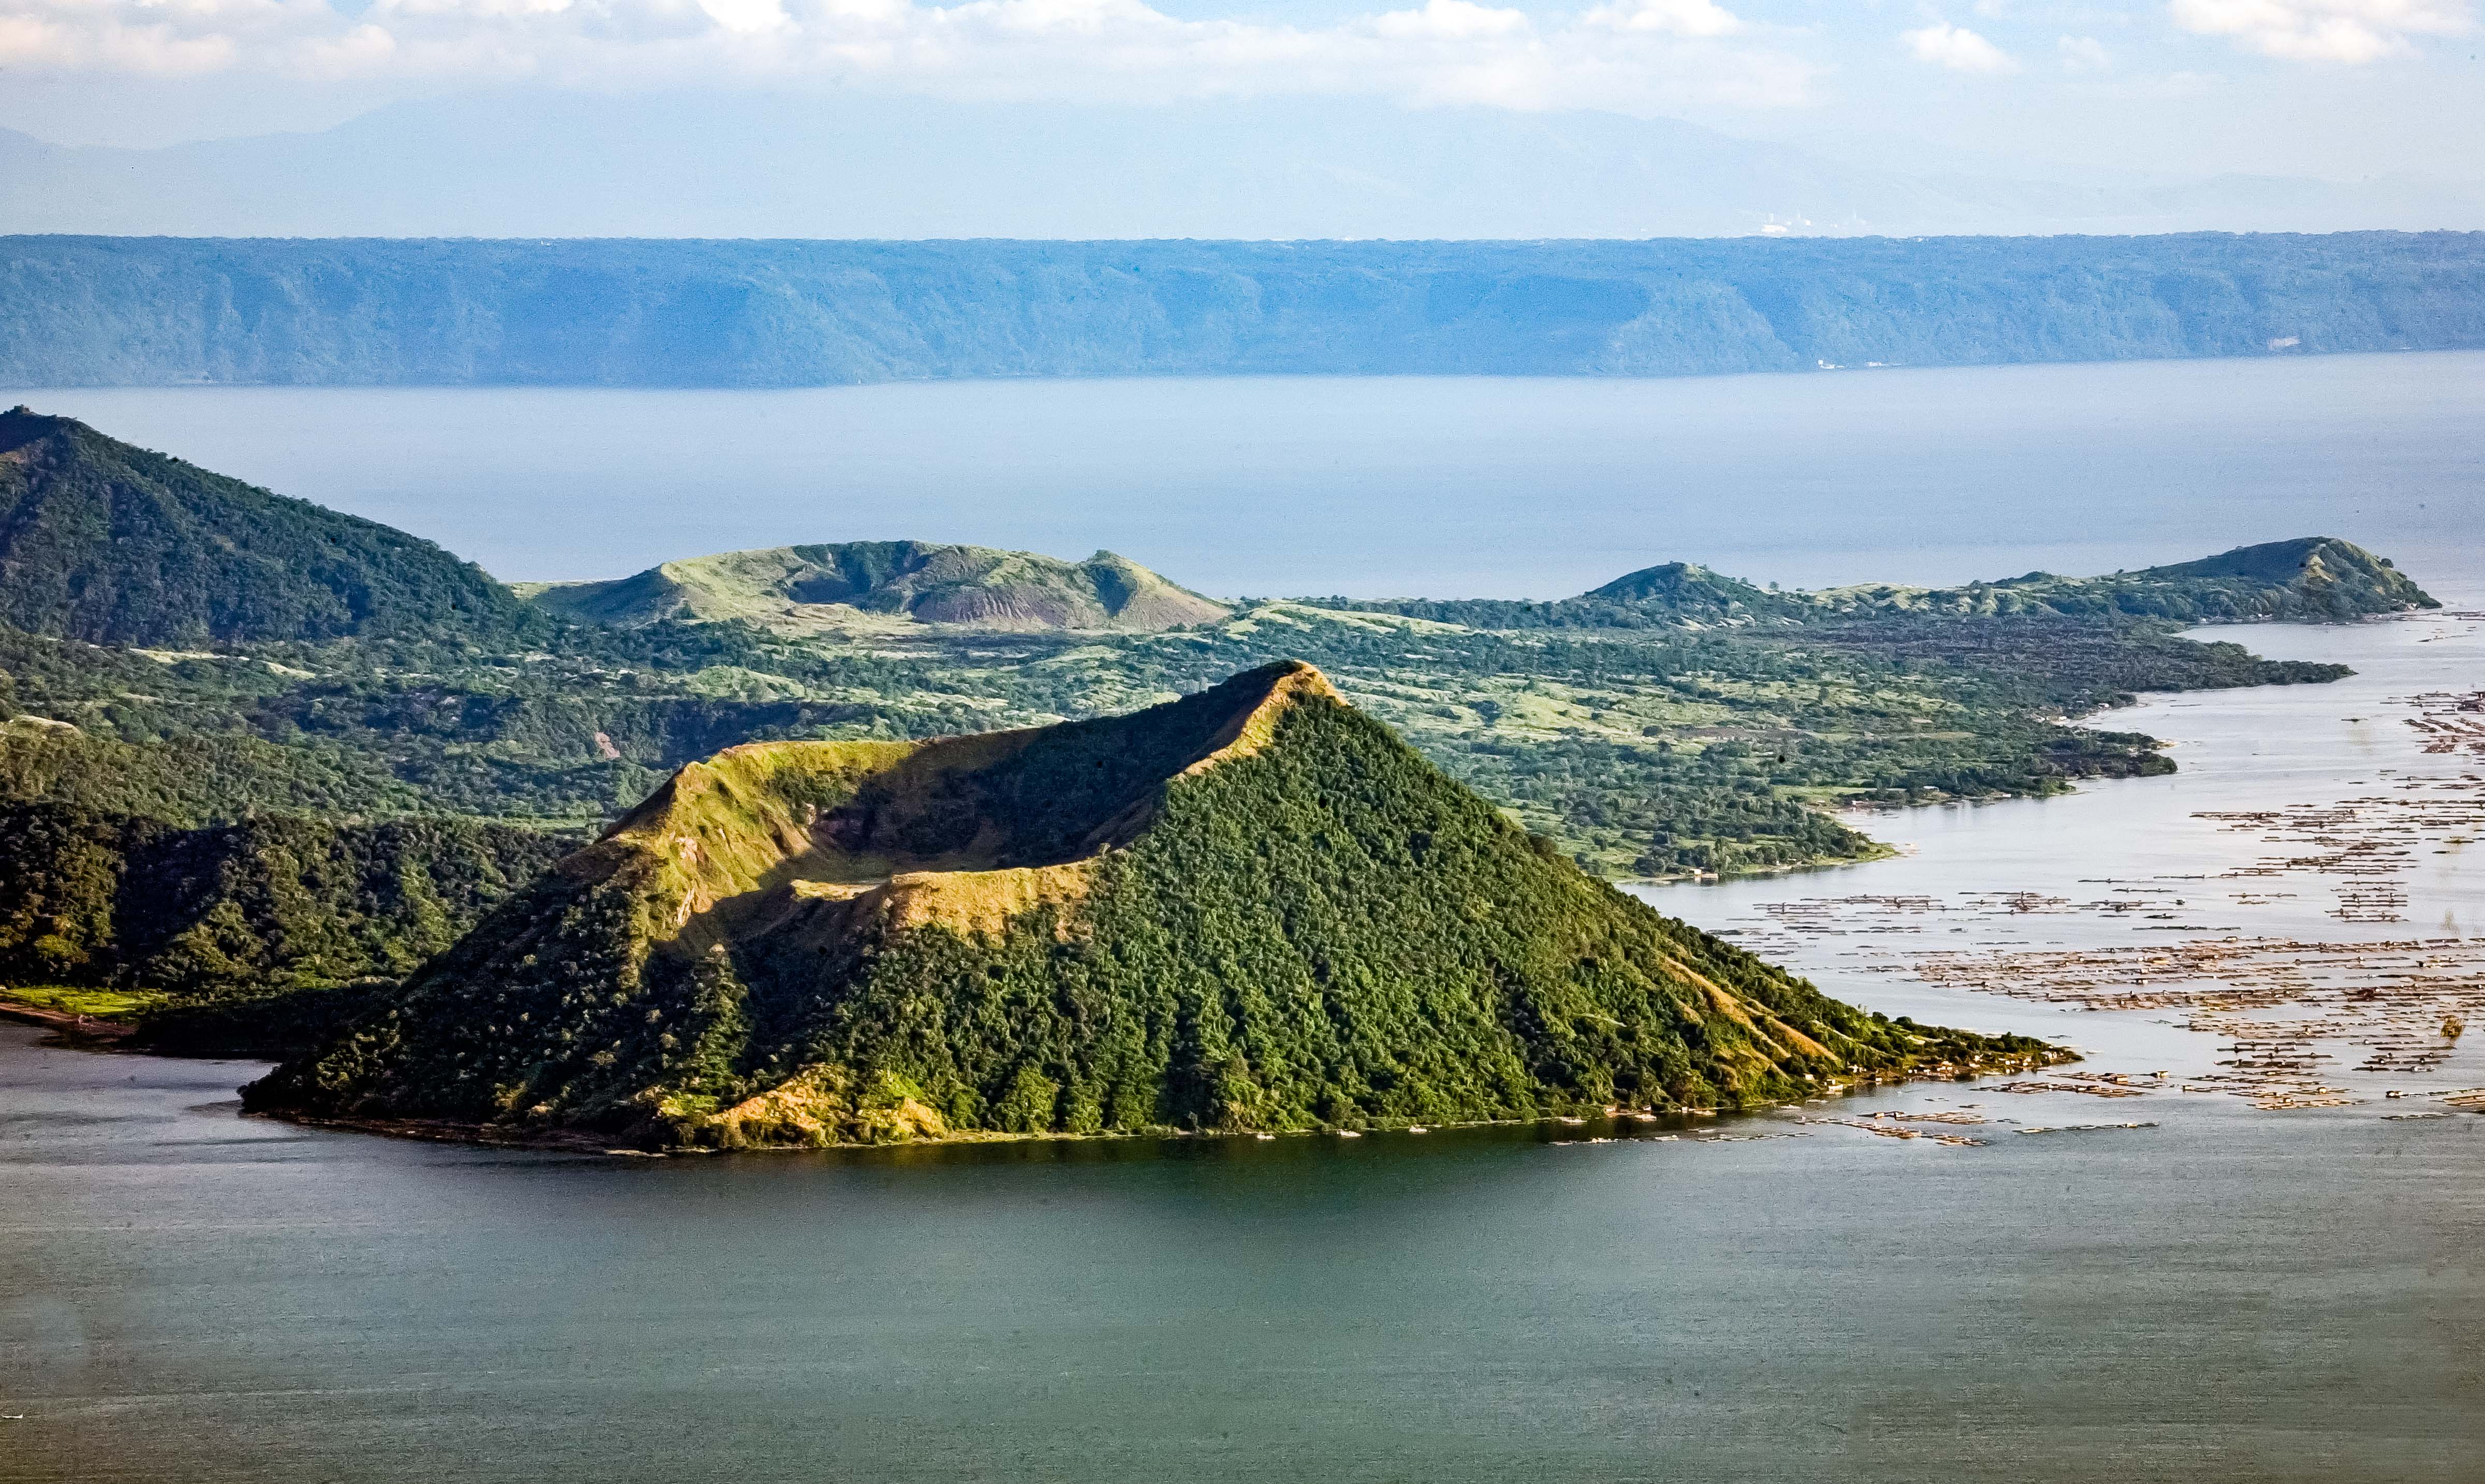 Philippines, Batangas Province, Taal Lake With Volcano Island, 2007